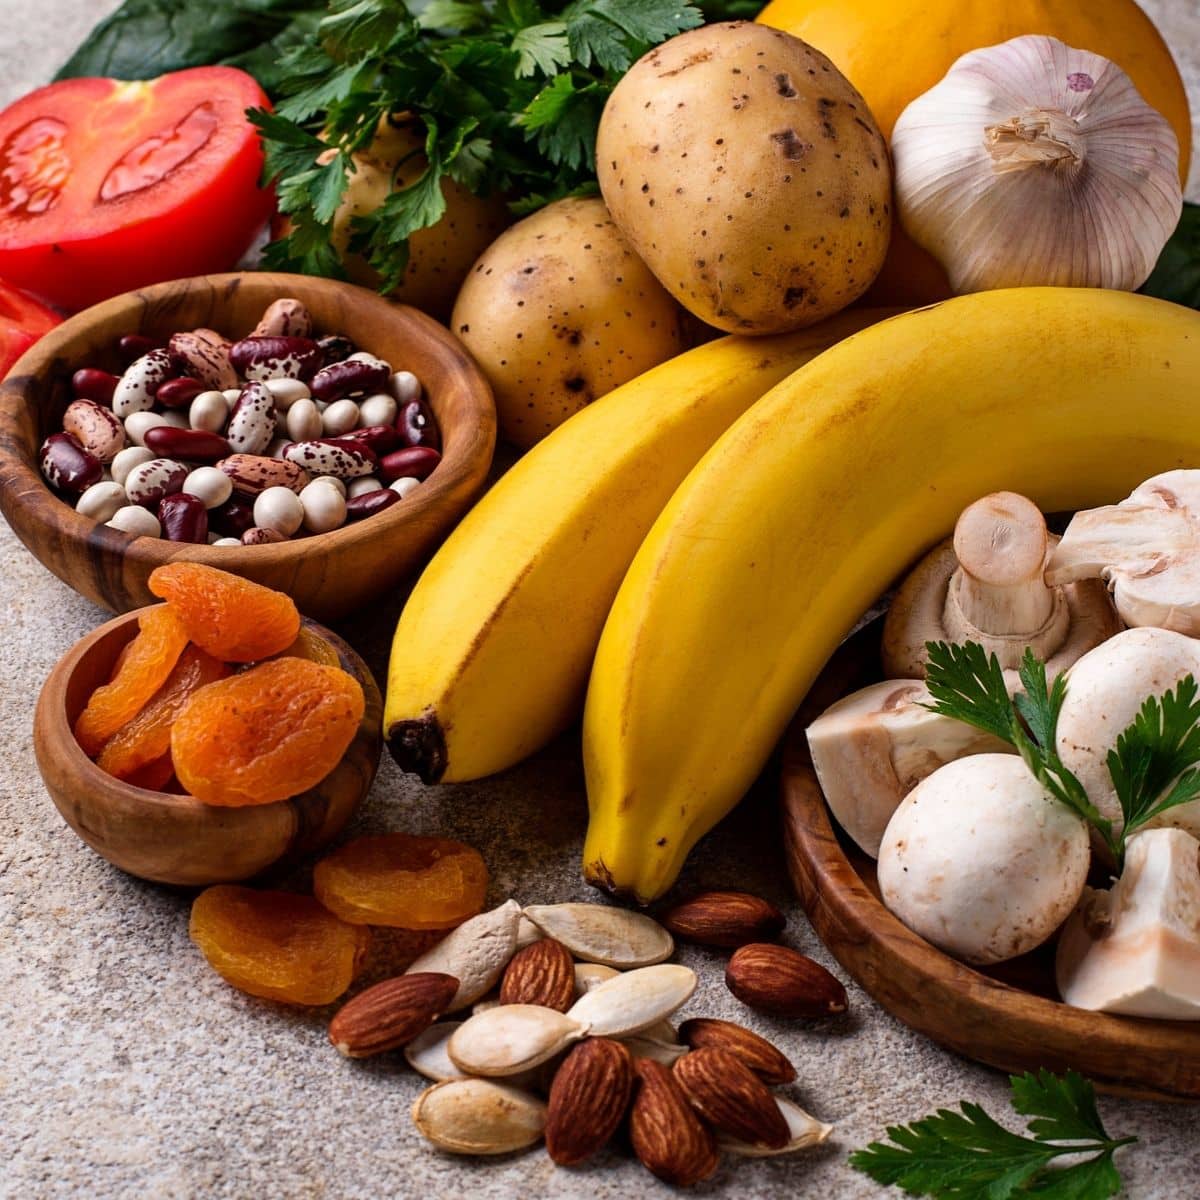  Vegetables and fruit containing potassium. 